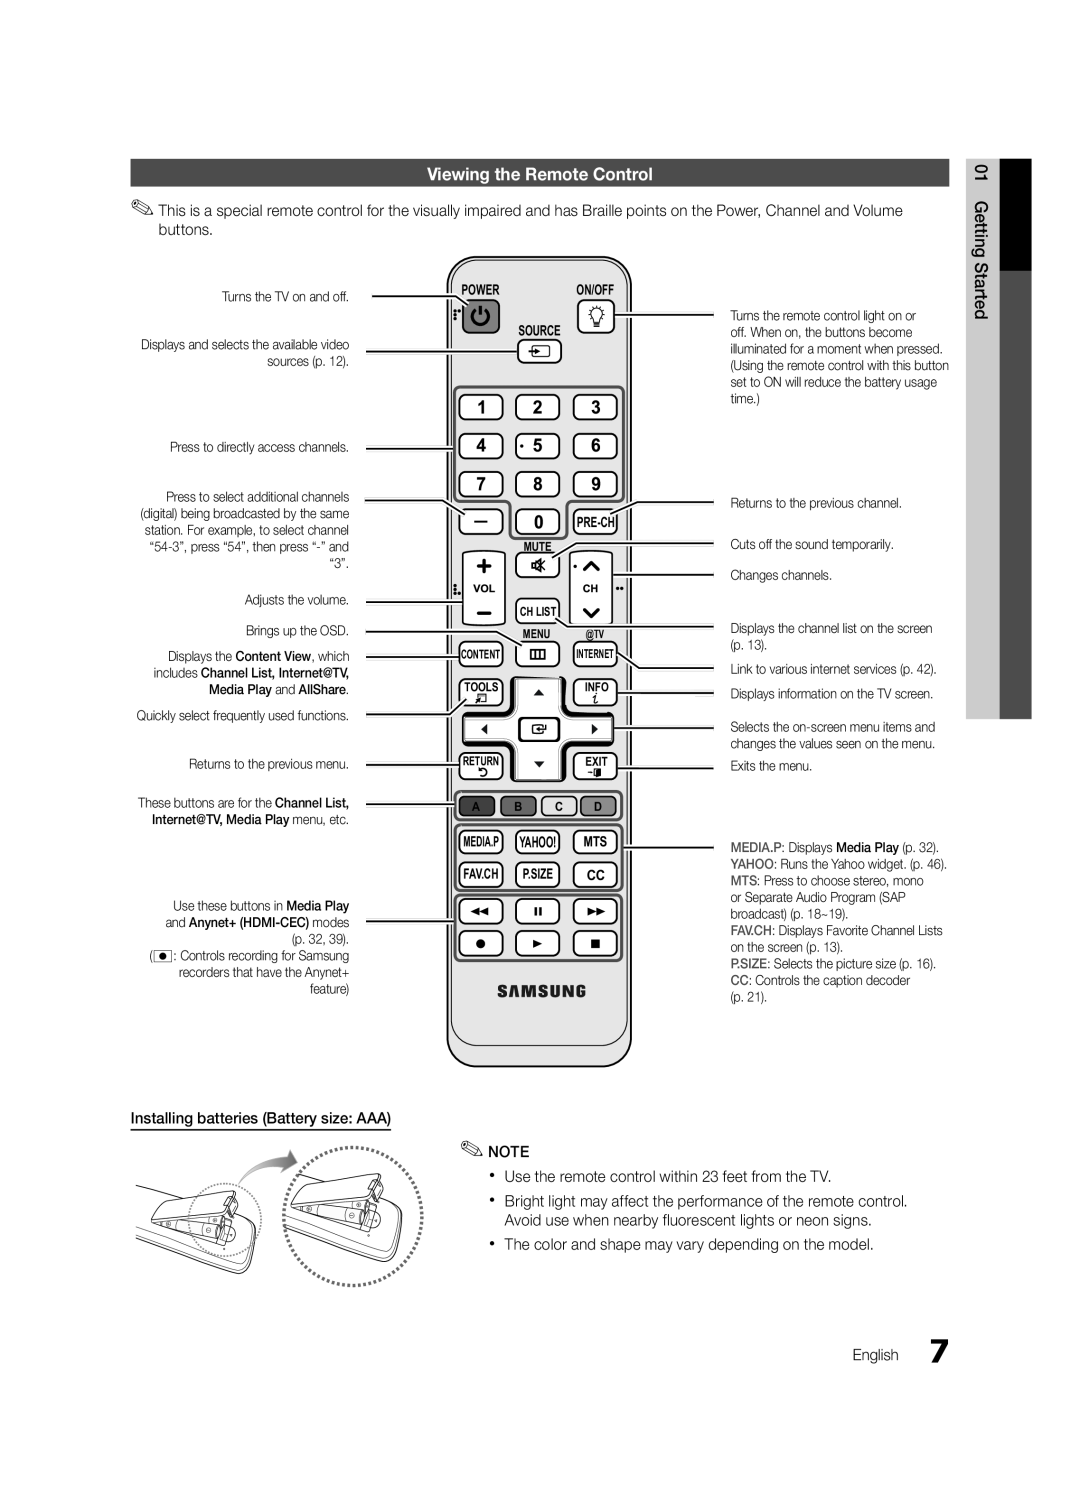 Samsung 6800 user manual Viewing the Remote Control, Started, Installing batteries Battery size AAA, Power On/Off Source 